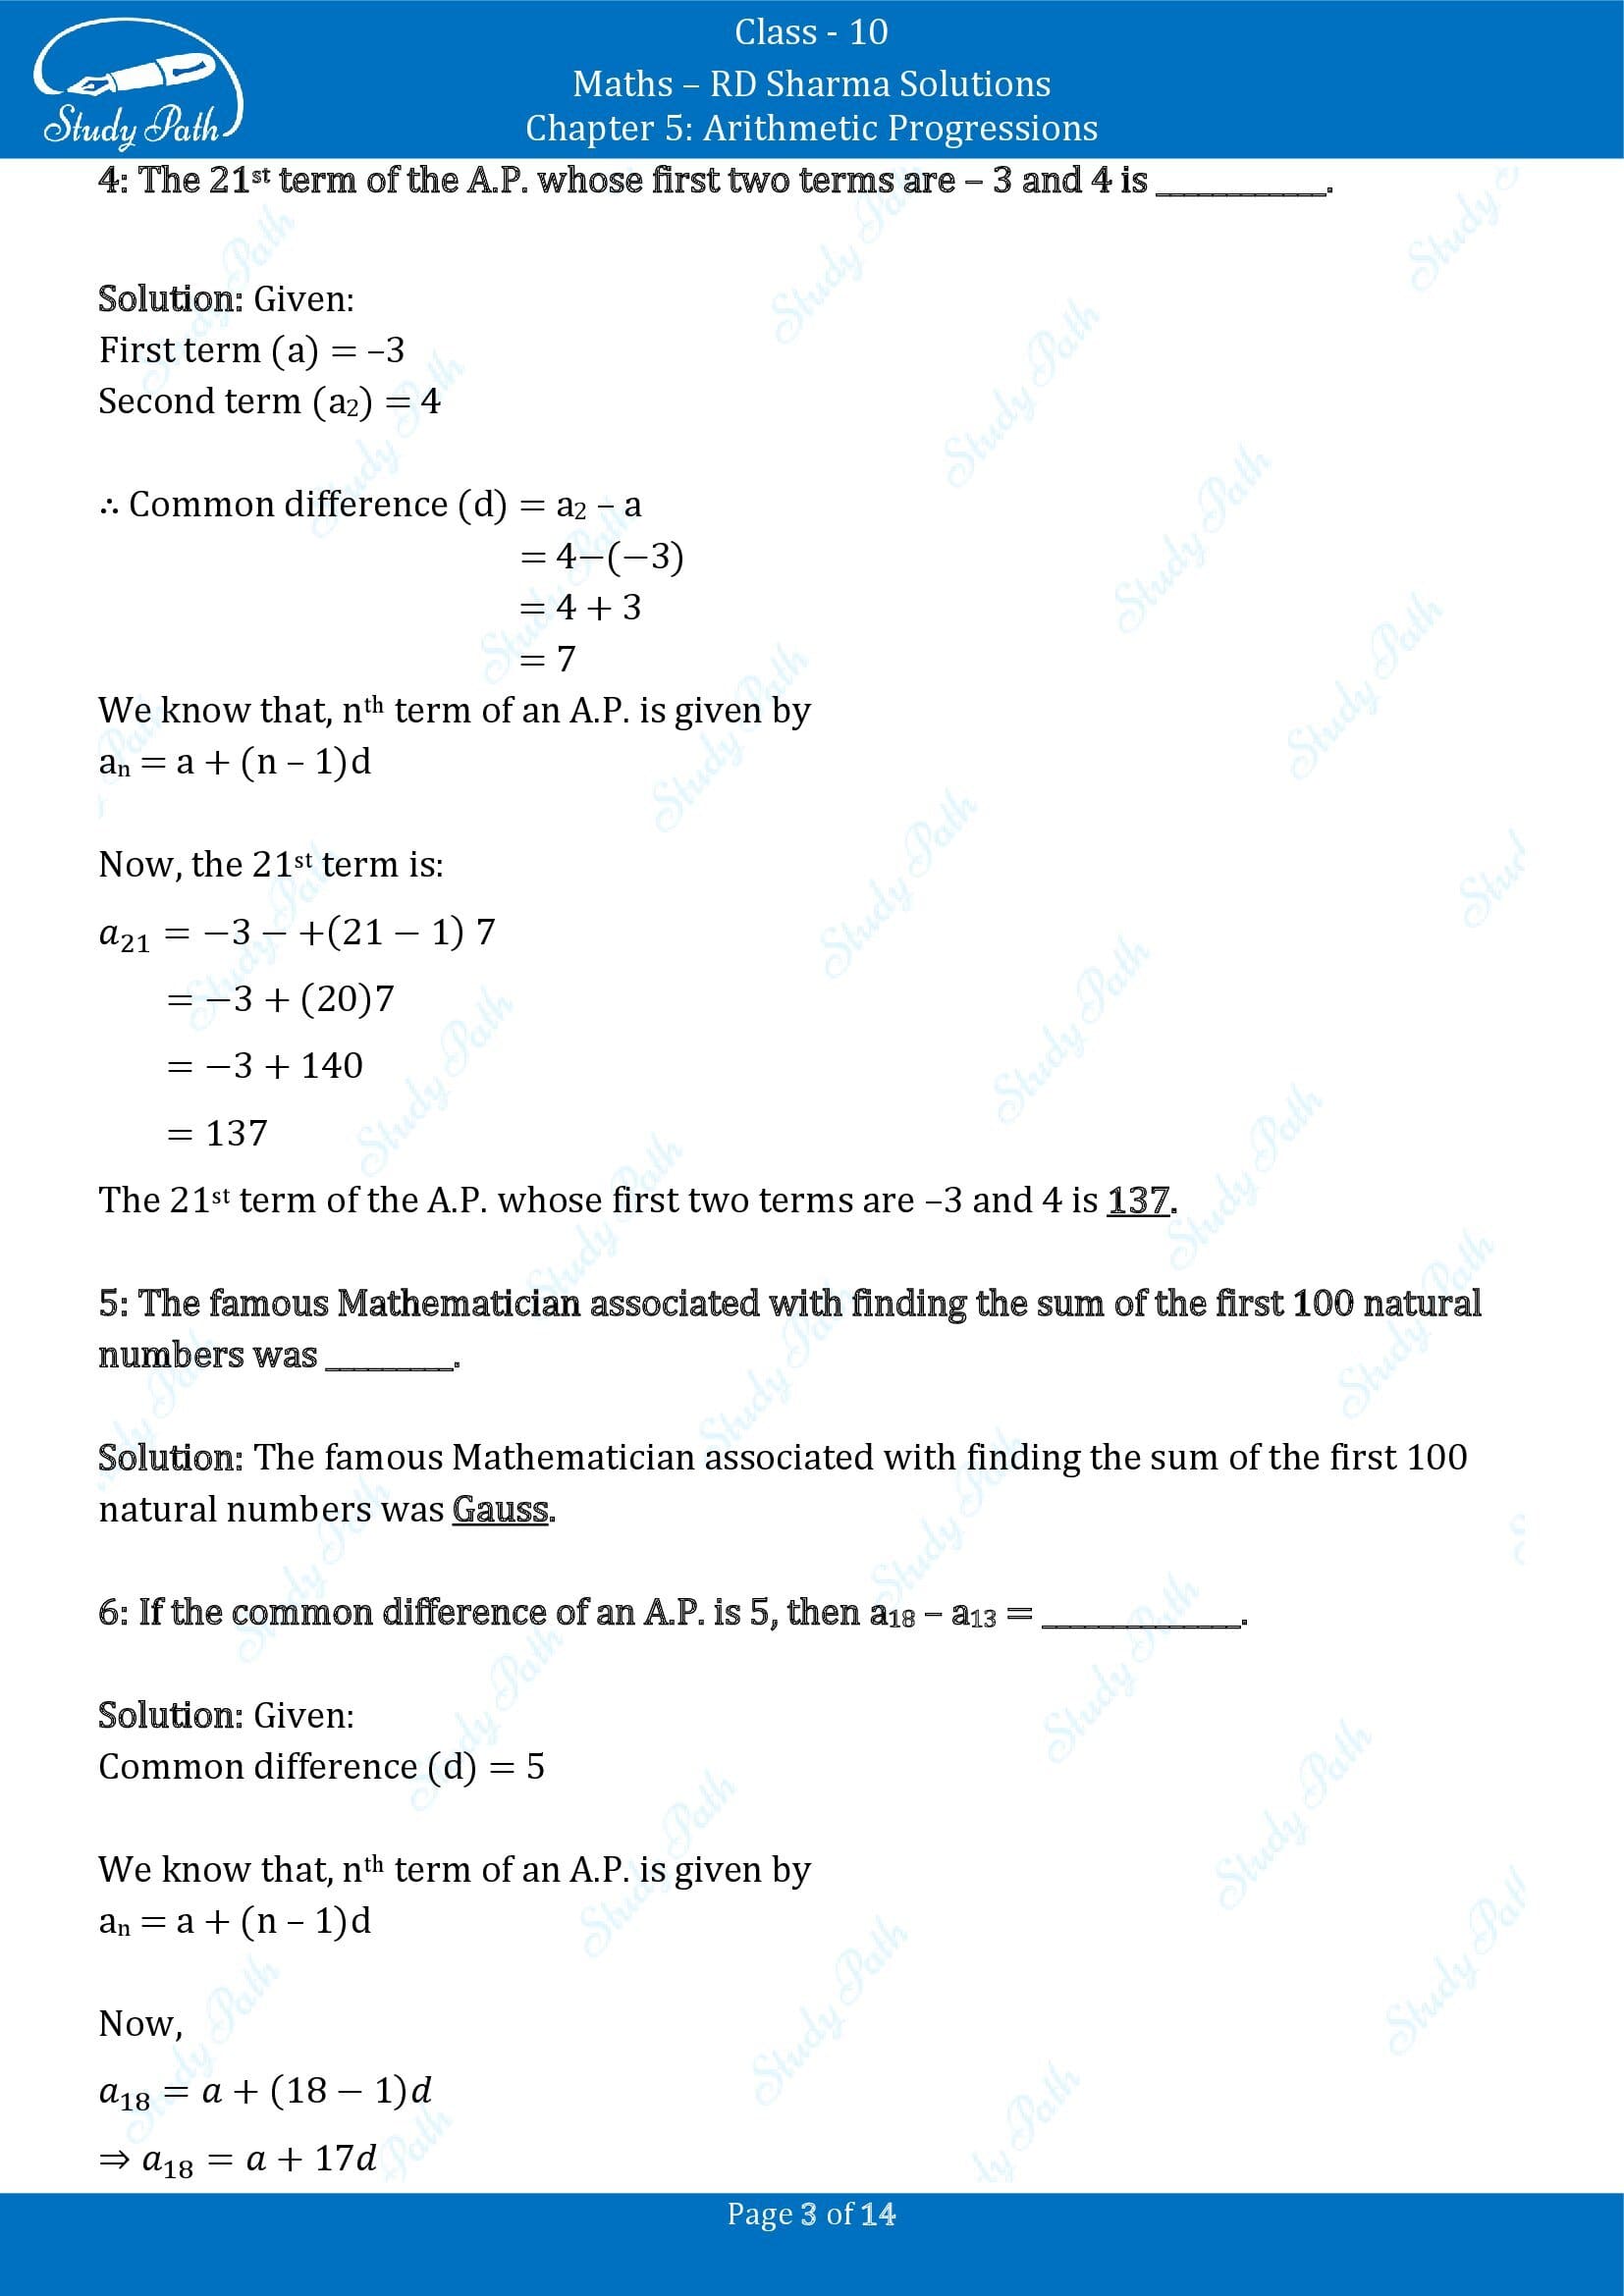 RD Sharma Solutions Class 10 Chapter 5 Arithmetic Progressions Fill in the Blank Type Questions FBQs 00003